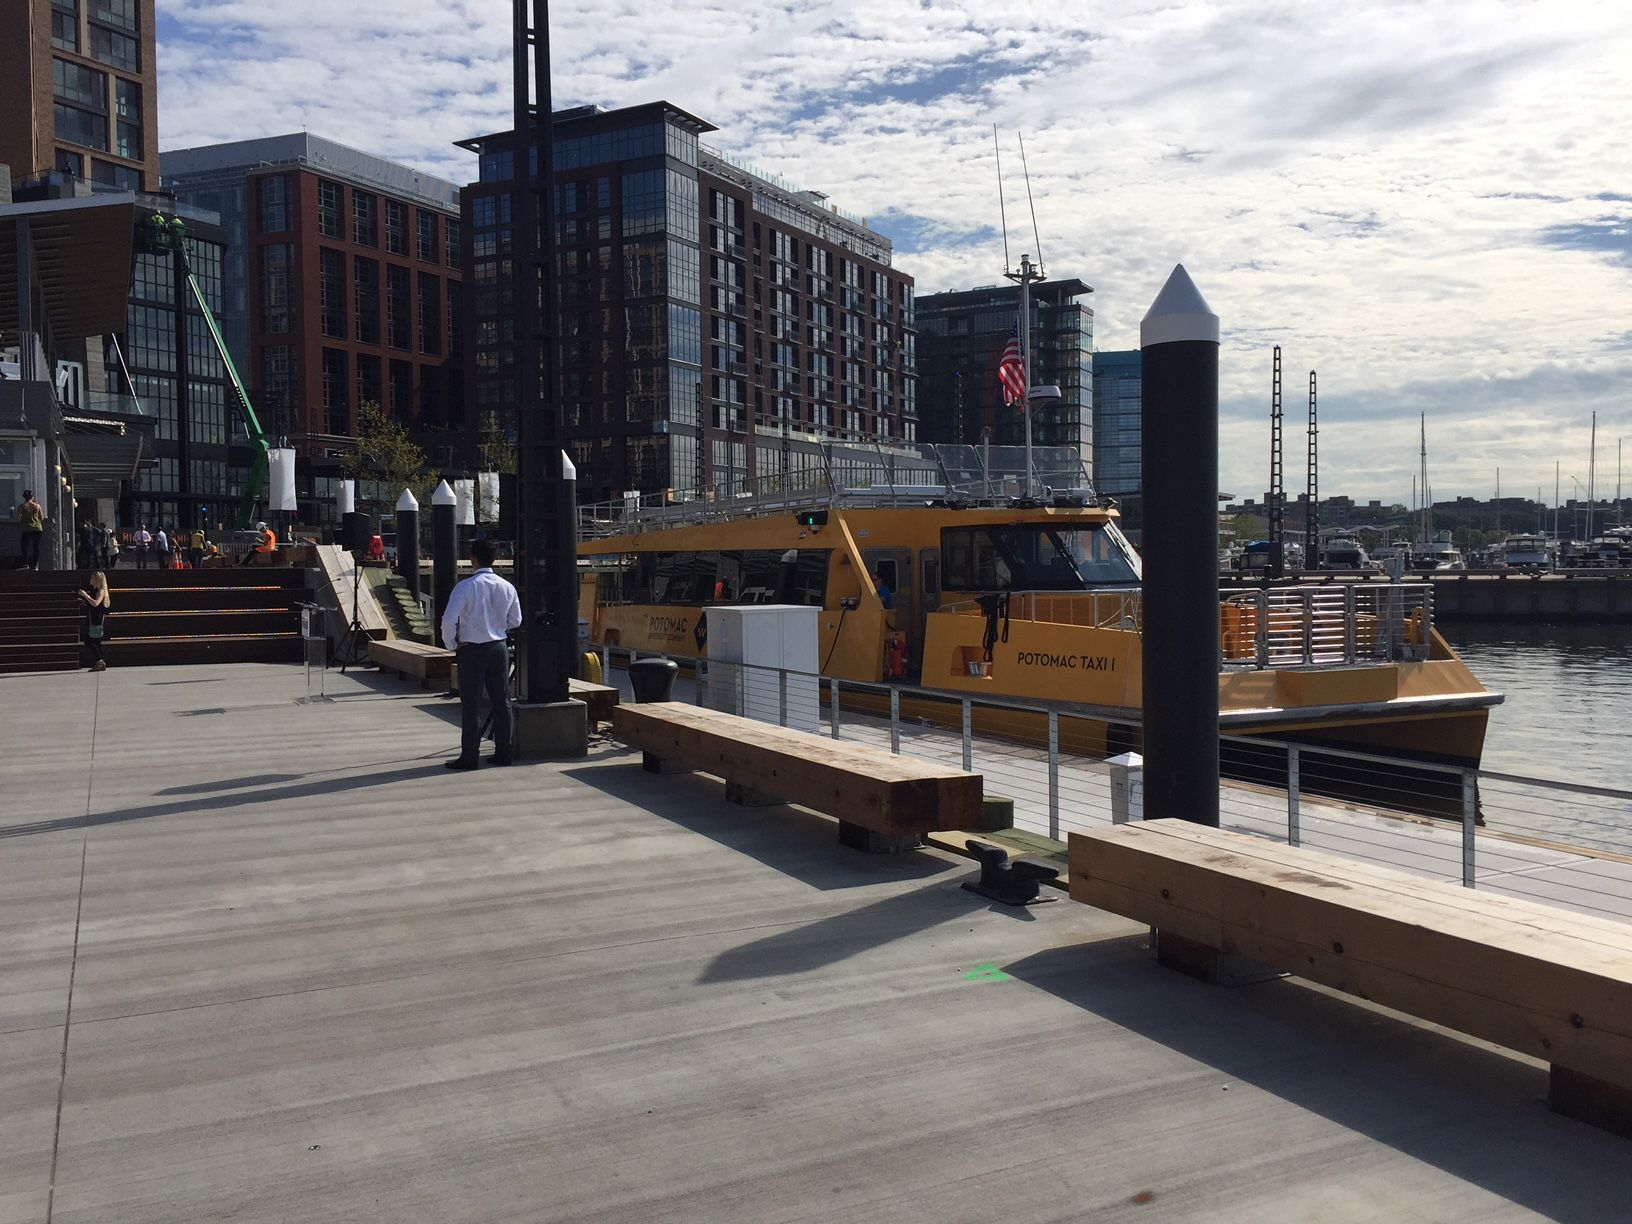 Starting Thursday, The Potomac Water Taxi will connect The Wharf with both Georgetown and Old Town Alexandria. (WTOP/Jack Pointer)